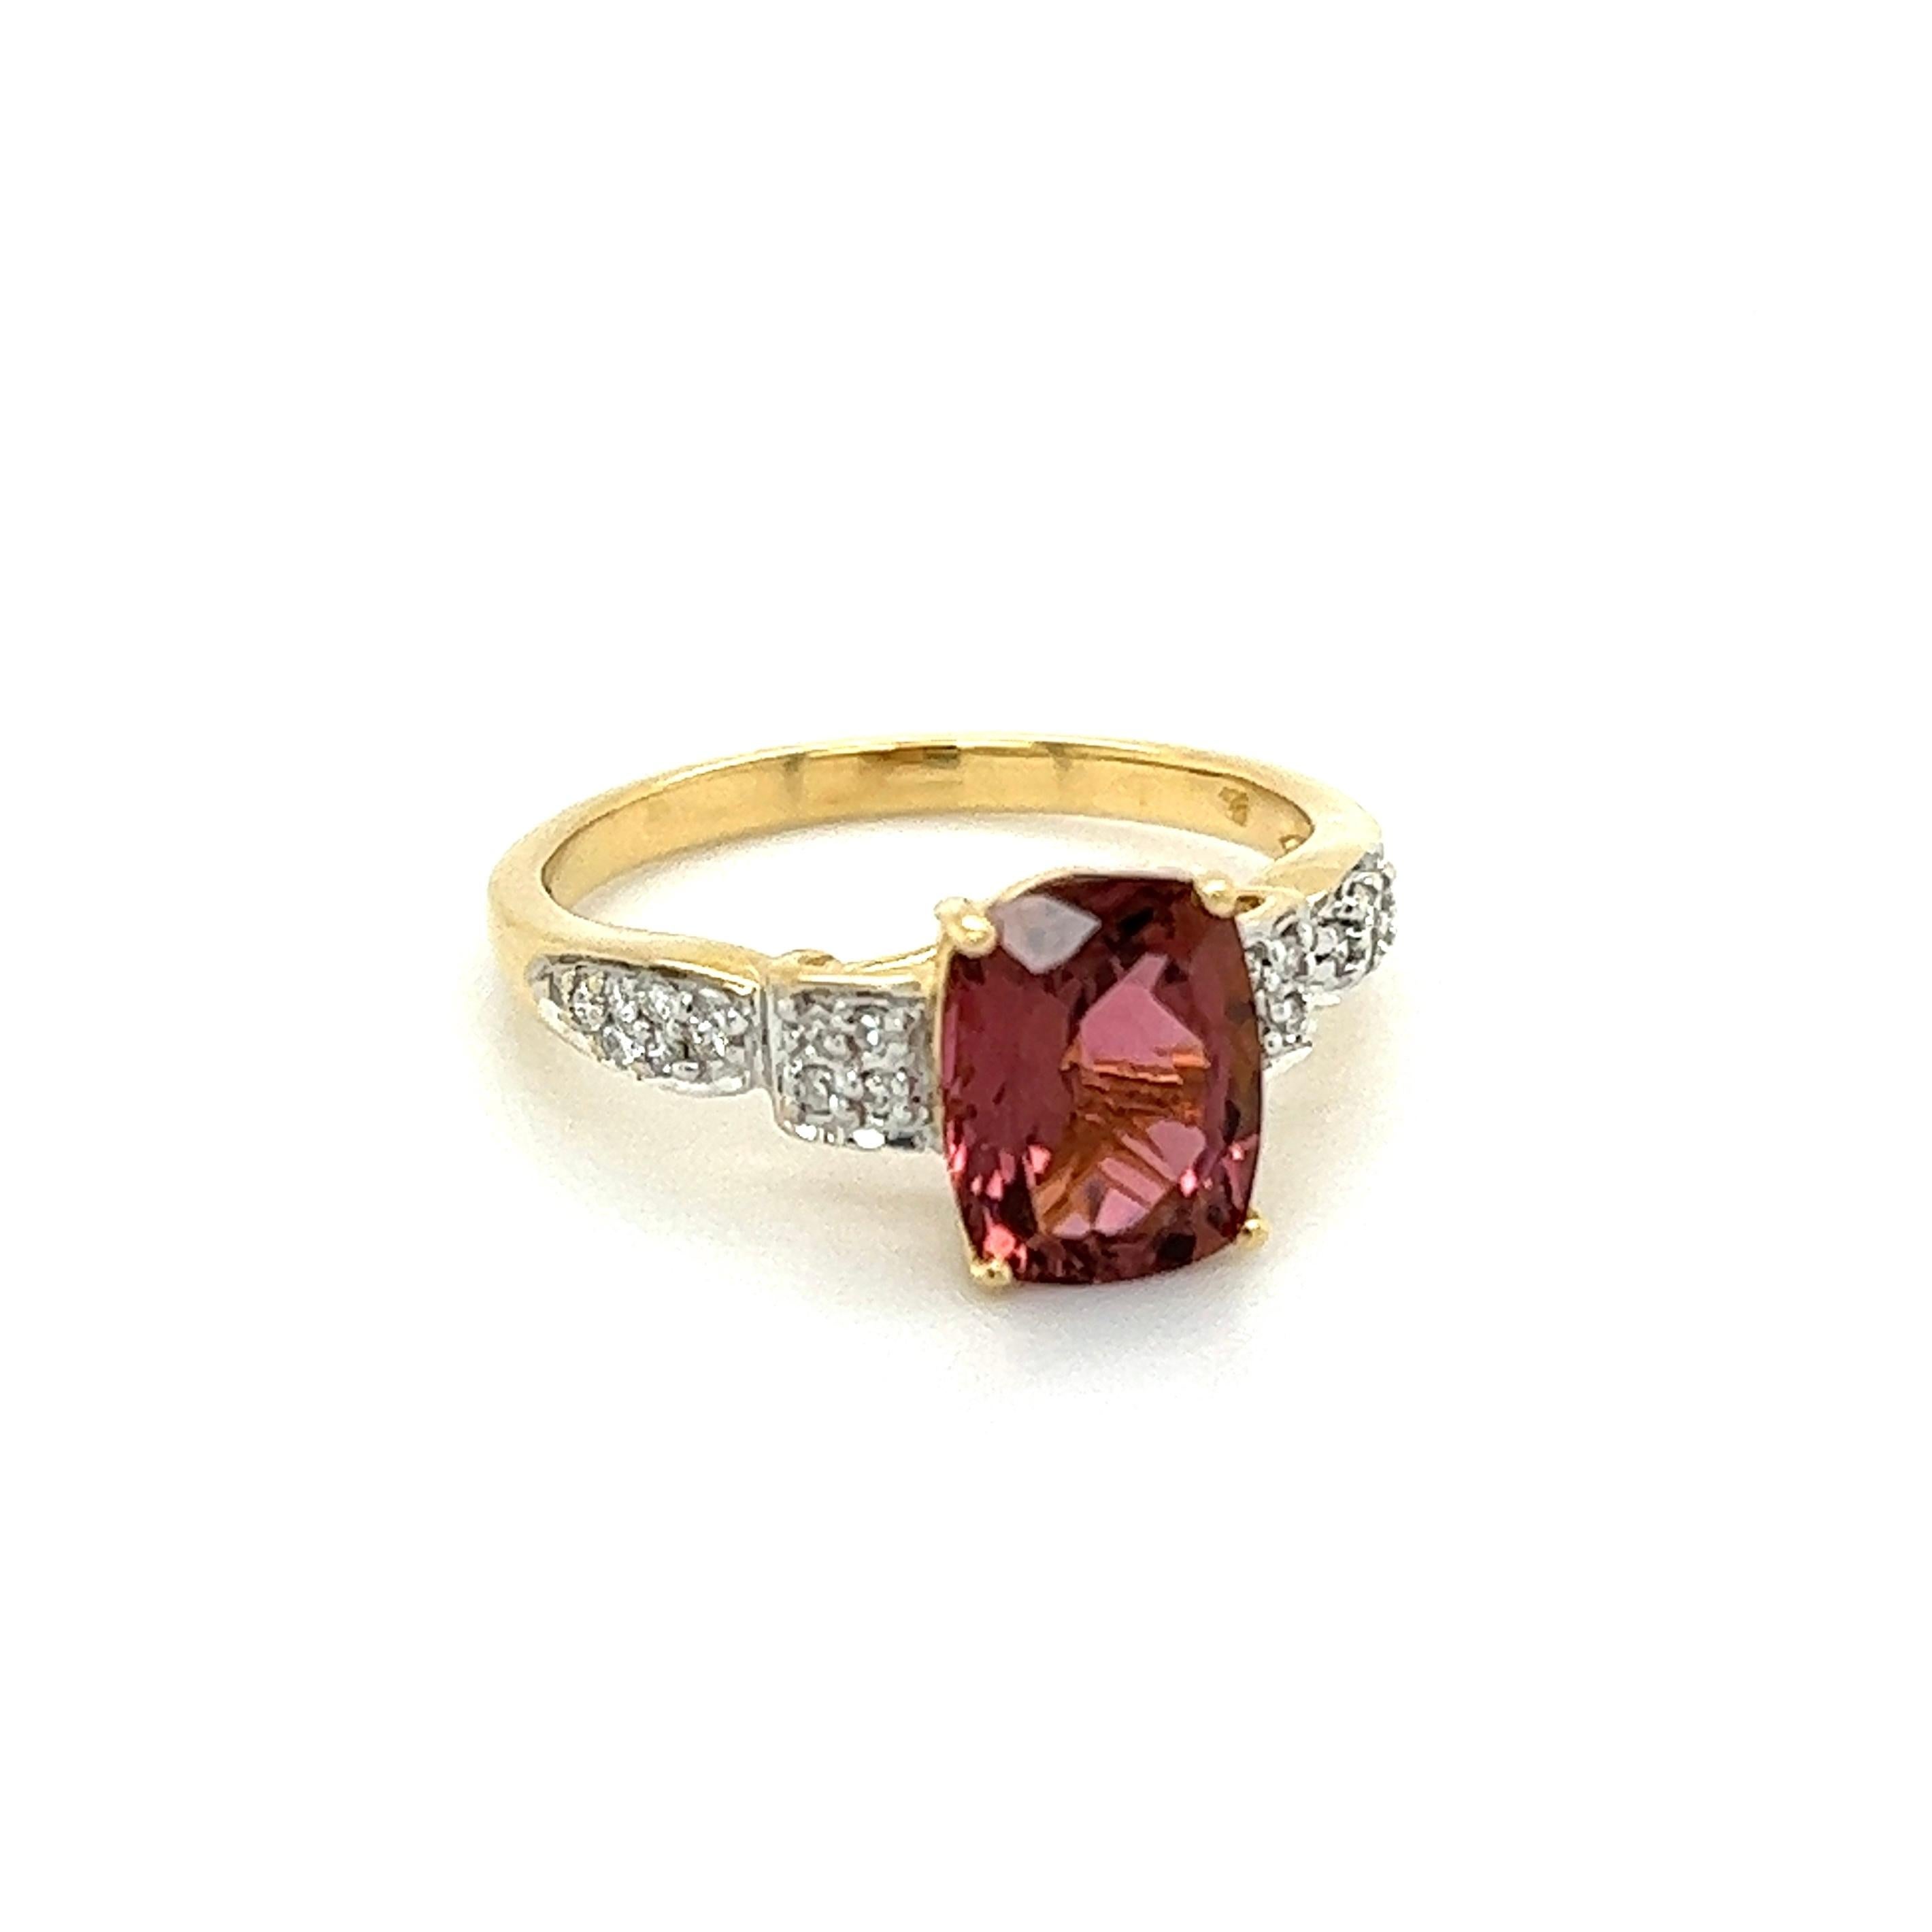 Simply Beautiful! Finely detailed Aquamarine and Diamond Gold Cocktail Ring. Centering a Hand set securely nestled 1.93 Carat Cushion Pink Tourmaline, accented on either side by Round Brilliant-cut Diamonds, weighing approx. 0.20tcw. Hand crafted